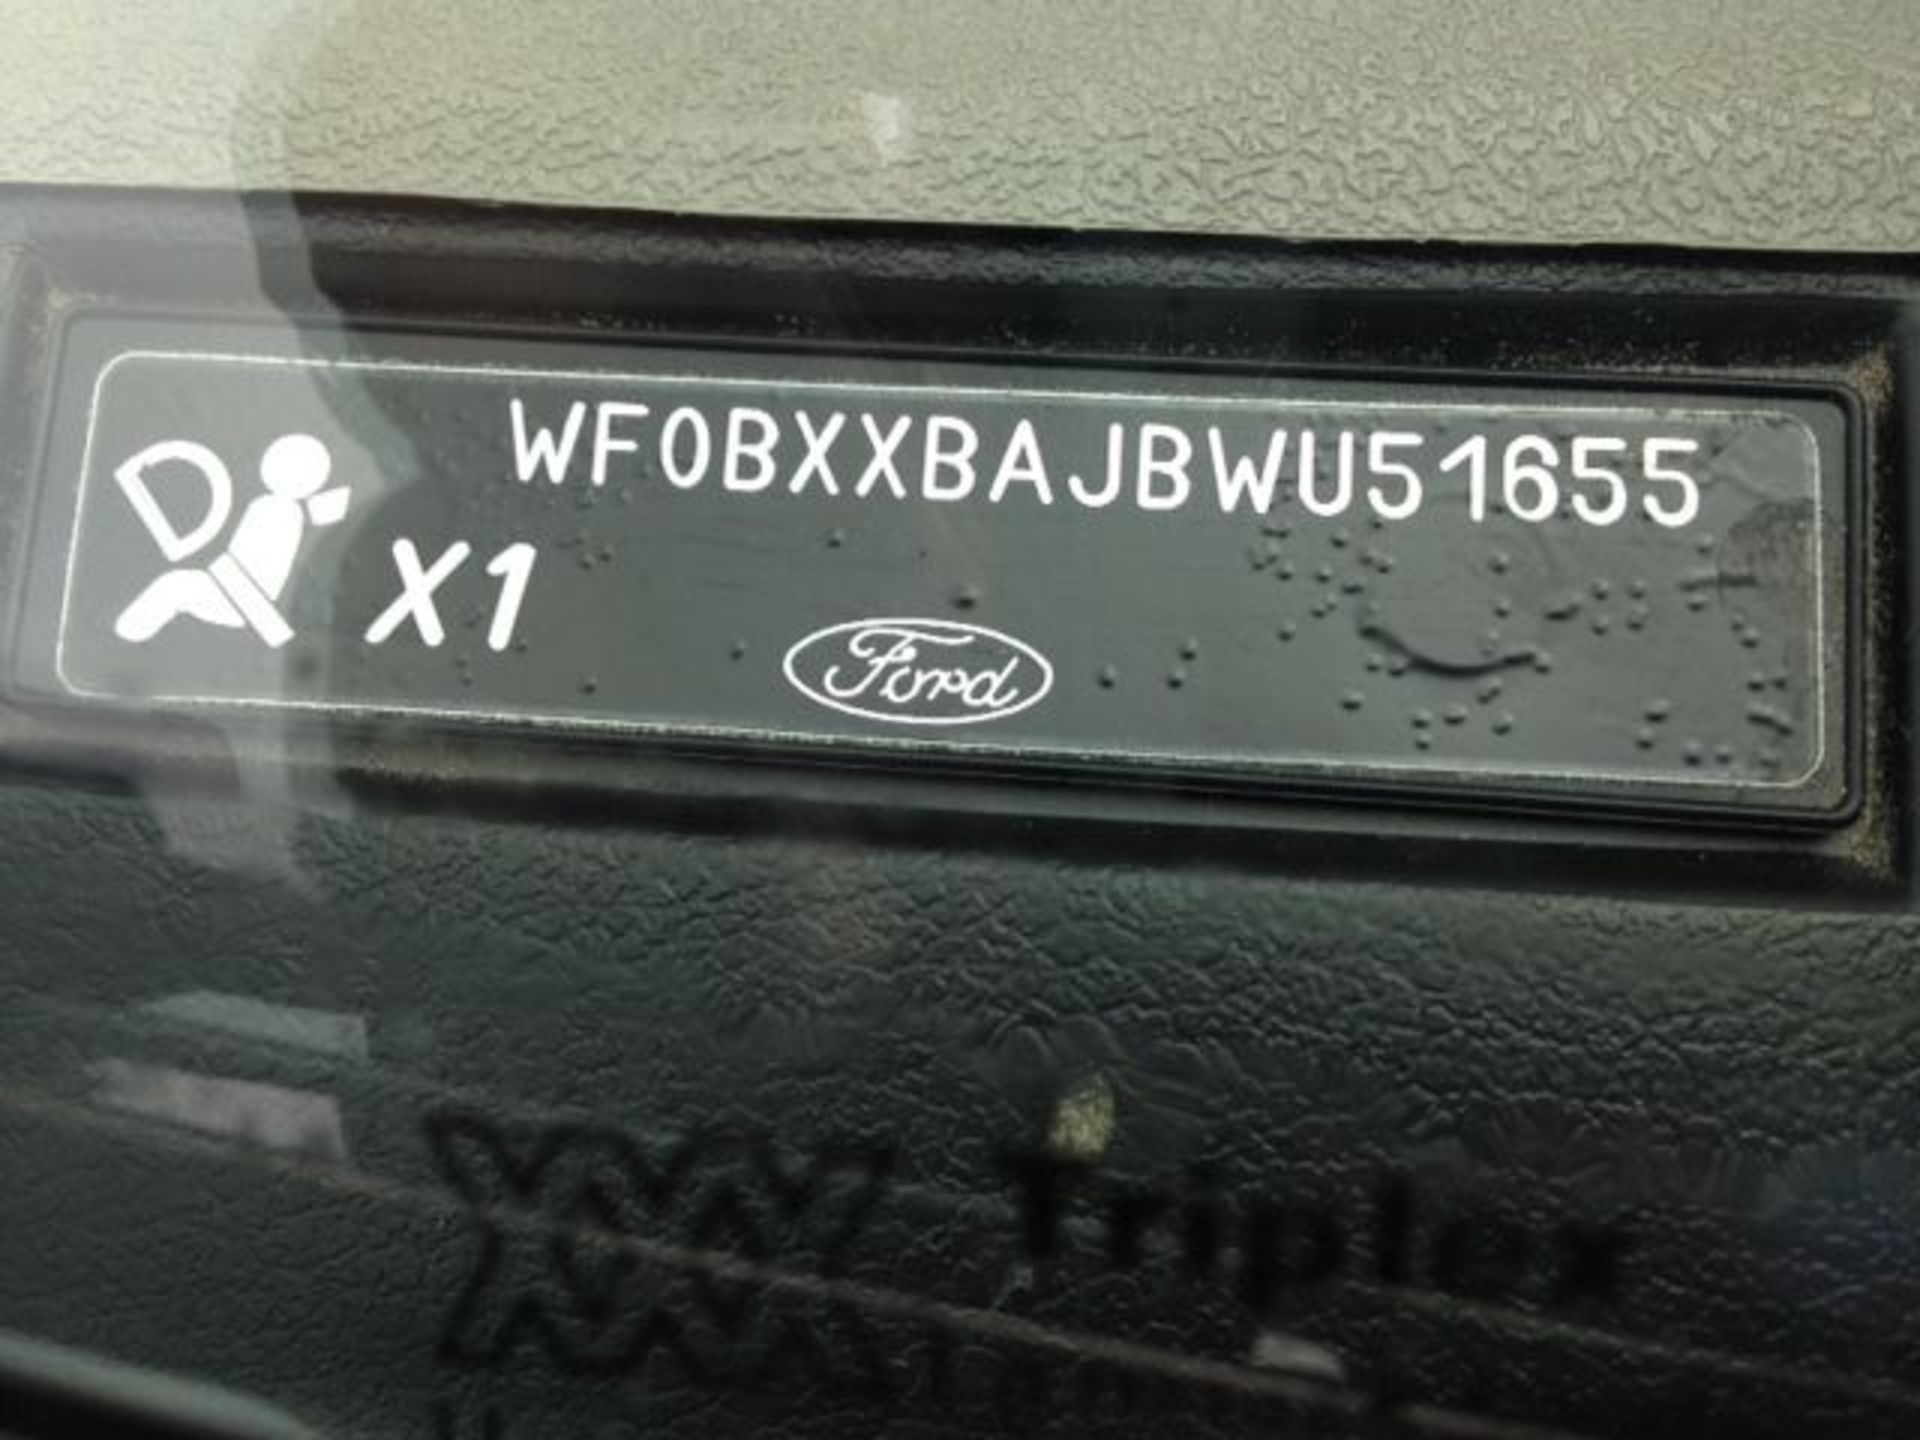 FORD, FIESTA ZETEC - 1388cc, Chassis number WF0BXXBAJBWU51655 - supplied new on March 26th 1999 as a - Image 5 of 14